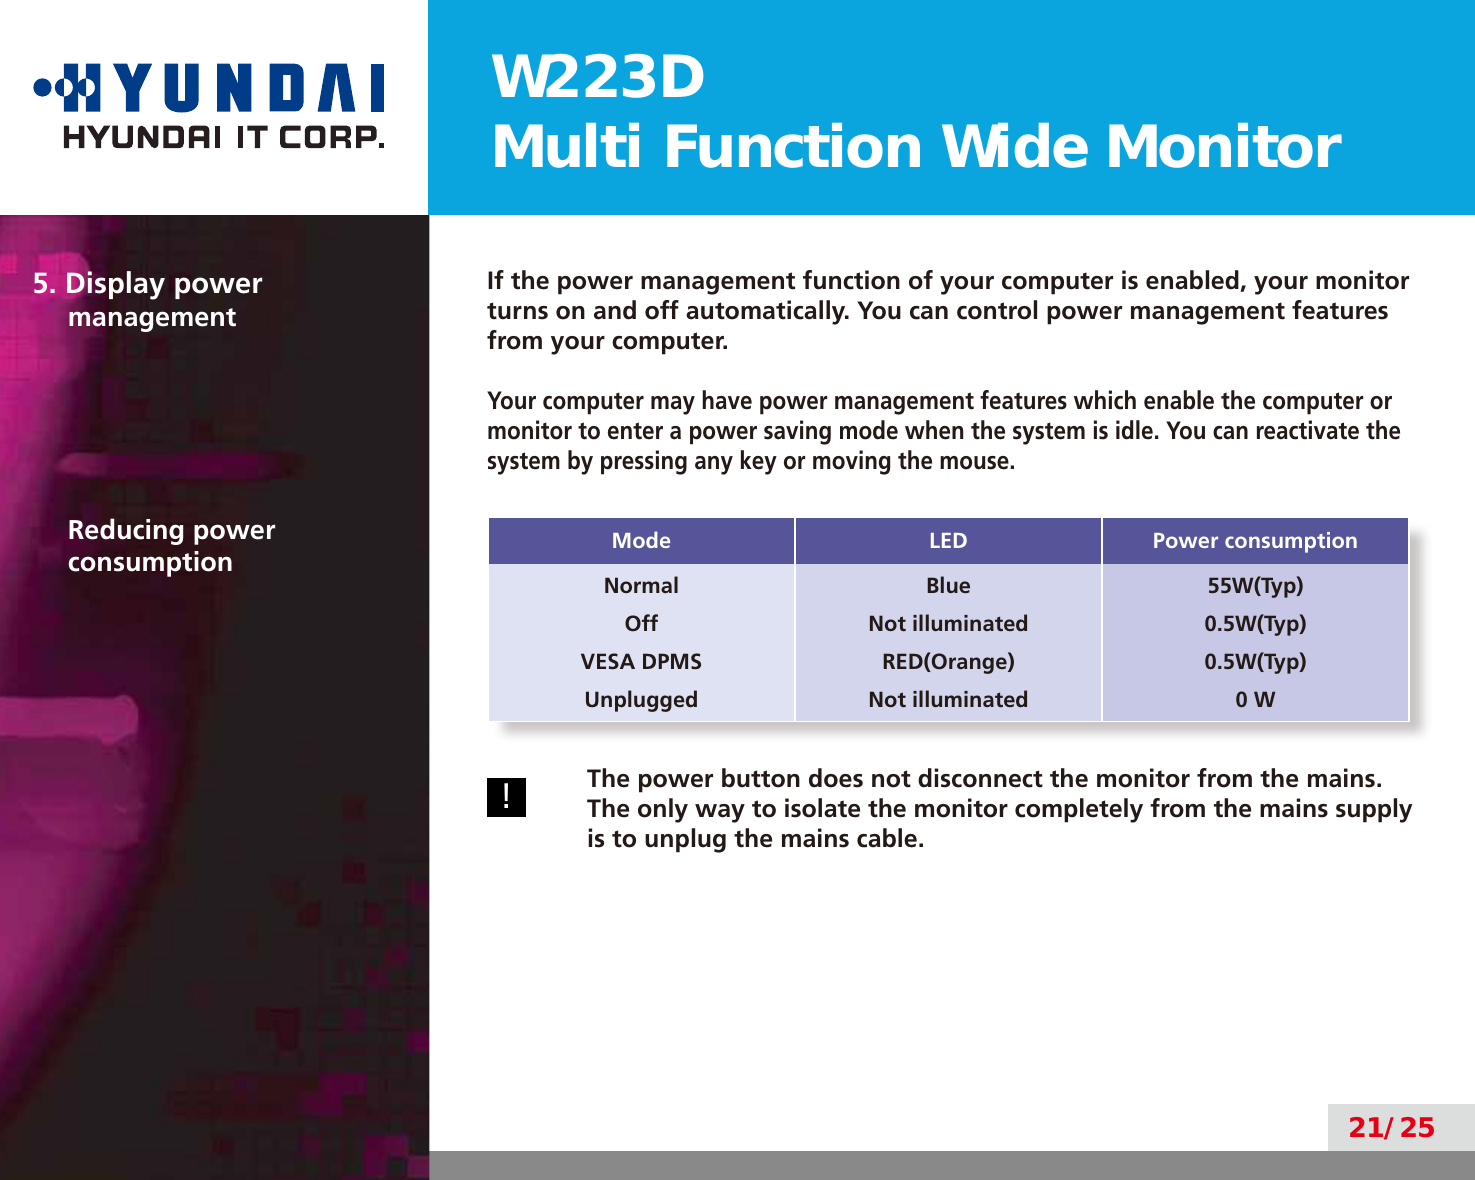 W223DMulti Function Wide Monitor21/255. Display power managementIf the power management function of your computer is enabled, your monitor turns on and off automatically. You can control power management features from your computer.Your computer may have power management features which enable the computer or monitor to enter a power saving mode when the system is idle. You can reactivate the system by pressing any key or moving the mouse.Reducing power consumption Mode LED Power consumptionNormalOffVESA DPMSUnpluggedBlueNot illuminatedRED(Orange)Not illuminated55W(Typ)0.5W(Typ)0.5W(Typ)0 W!The power button does not disconnect the monitor from the mains. The only way to isolate the monitor completely from the mains supply is to unplug the mains cable.